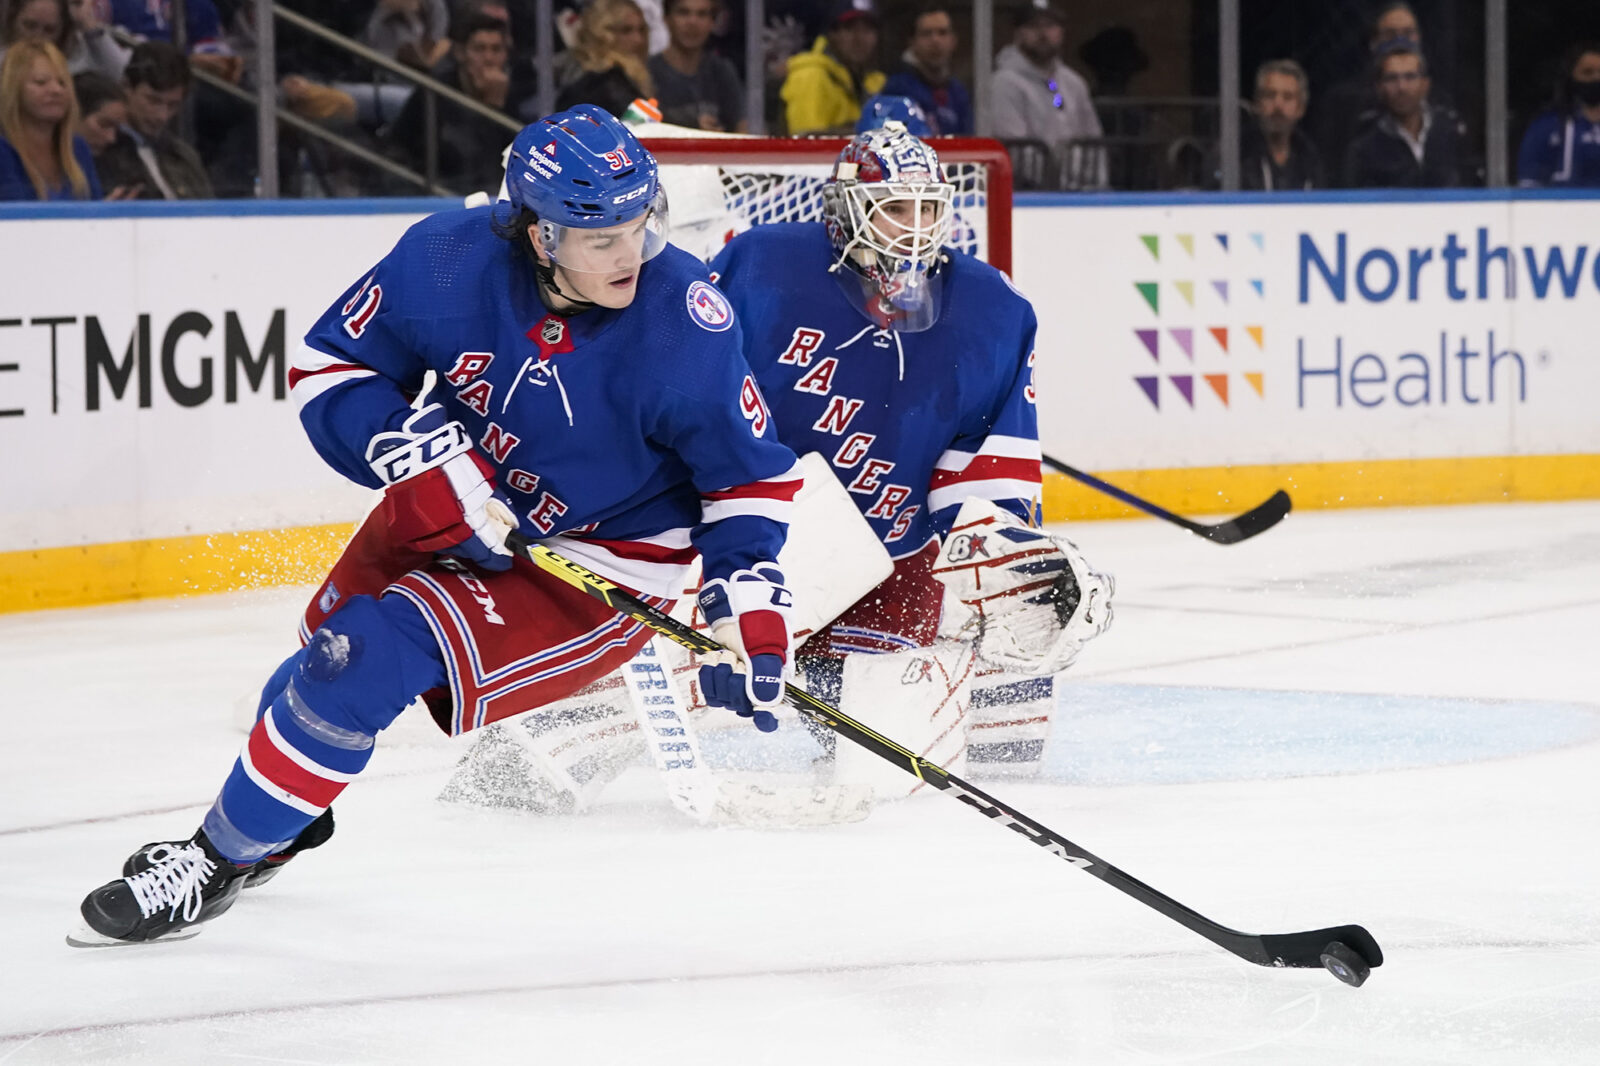 Sammy Blais sunk cost for the Rangers